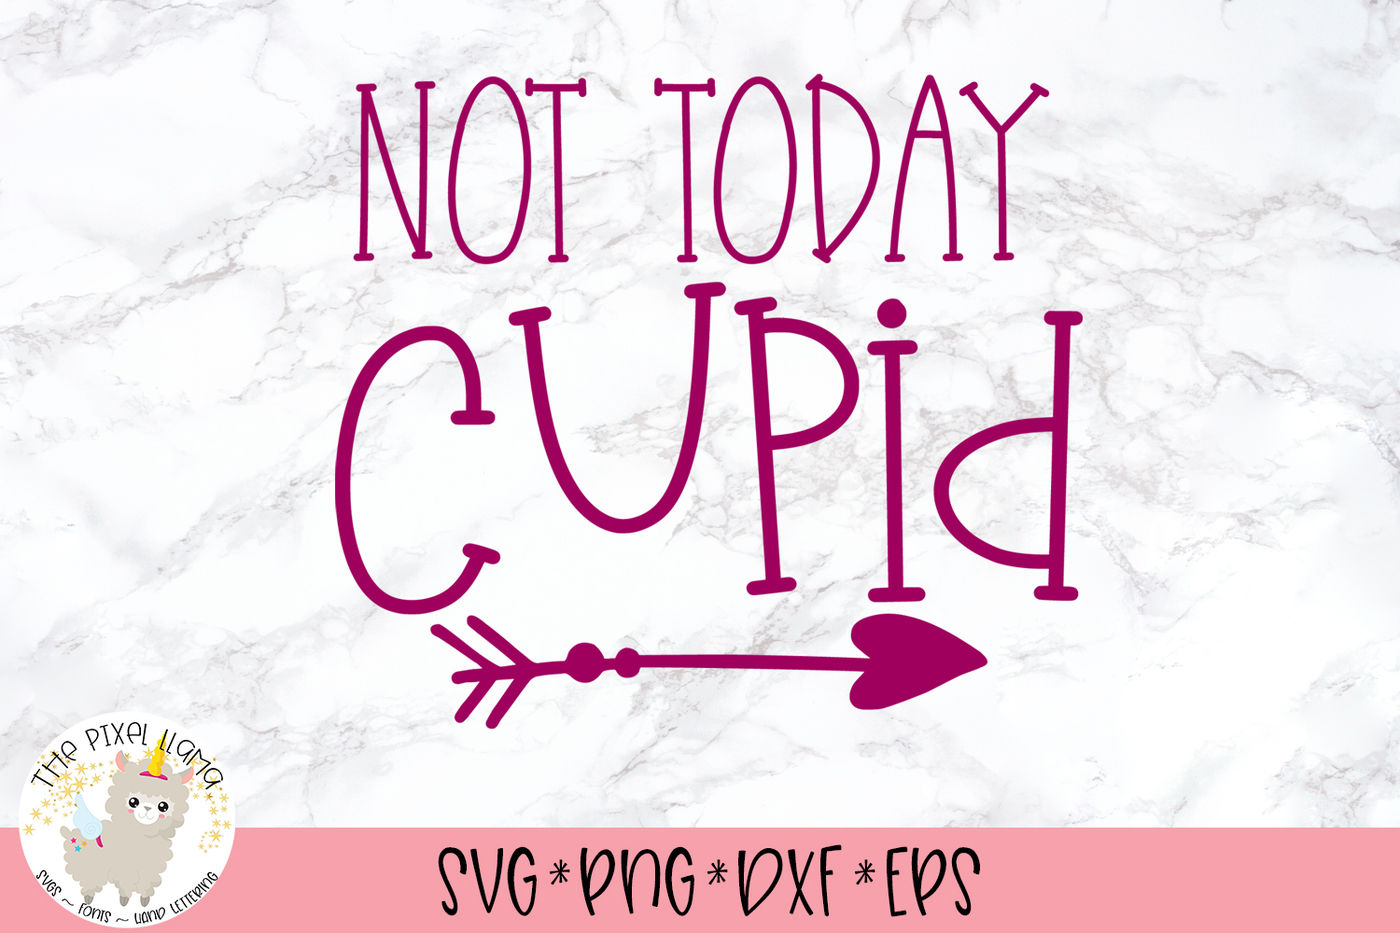 Not Today Cupid Anti Valentine SVG Cut File By The Pixel Llama